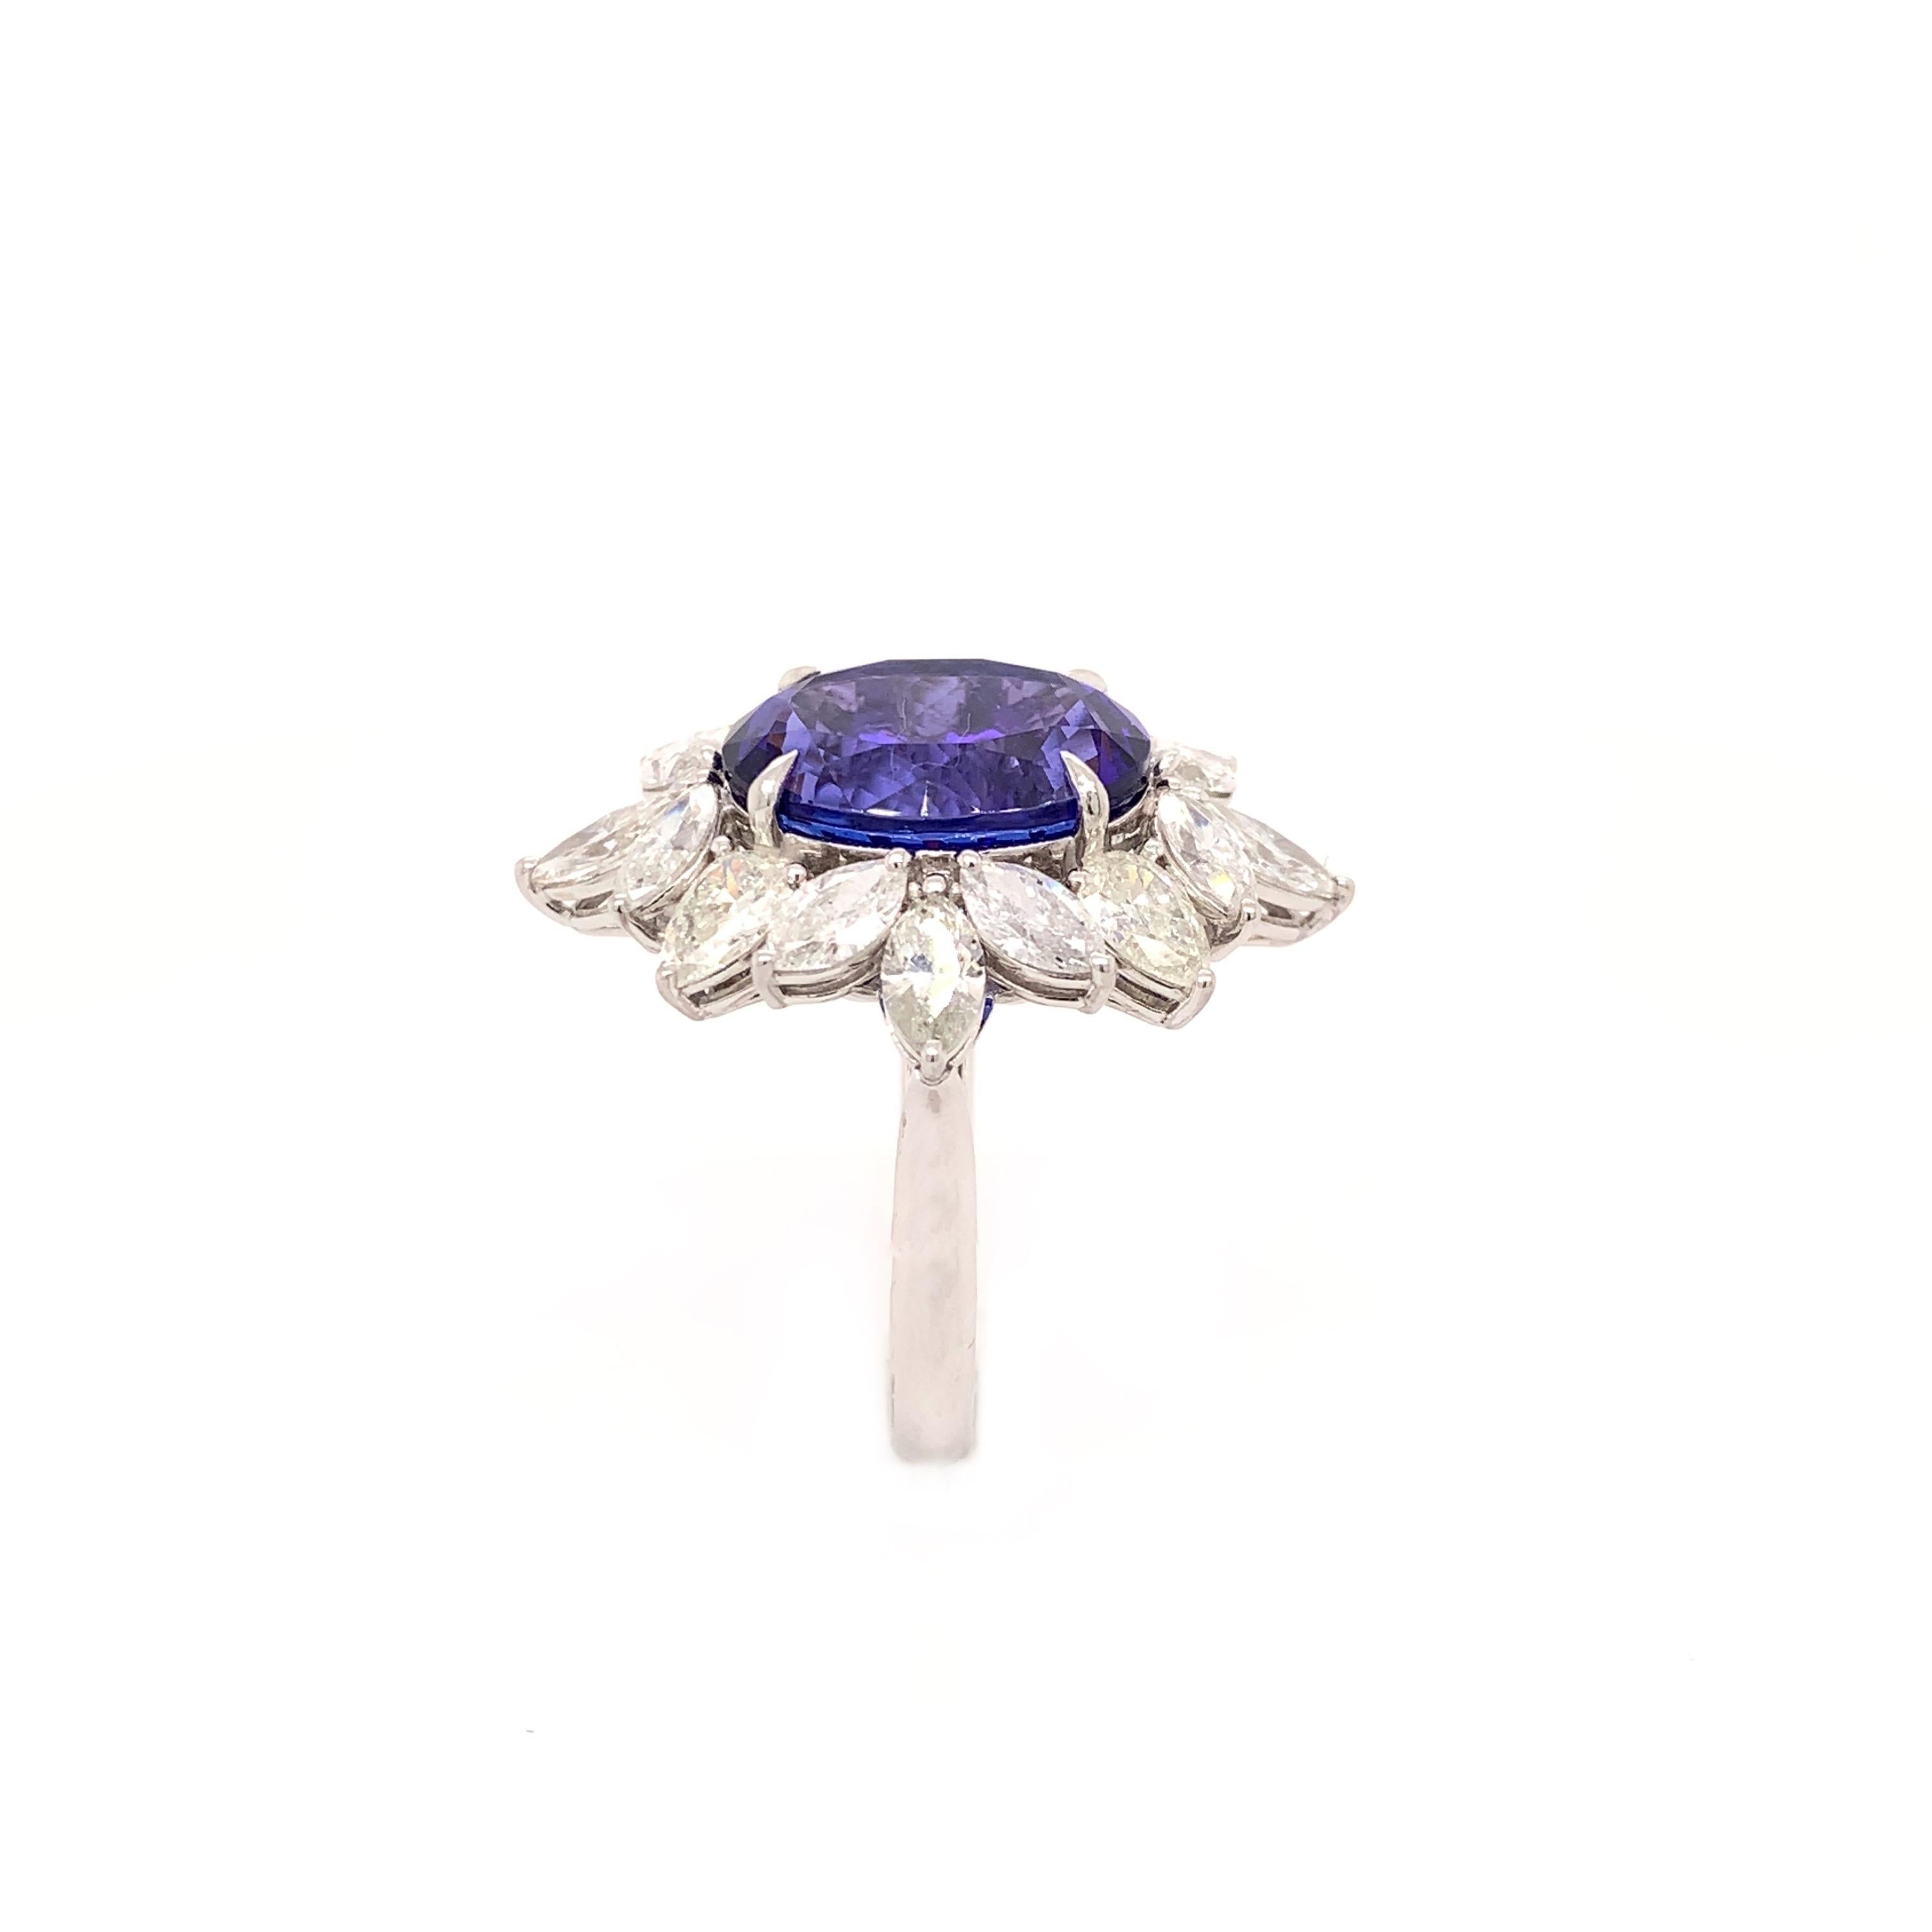 Glamorous tanzanite cocktail ring. Intense violet-blue with purple tint, high brilliance, oval faceted natural 9.01 carats tanzanite encased in petal open mount, set in high profile, with four knife prongs, accented with pear brilliant cut diamonds.